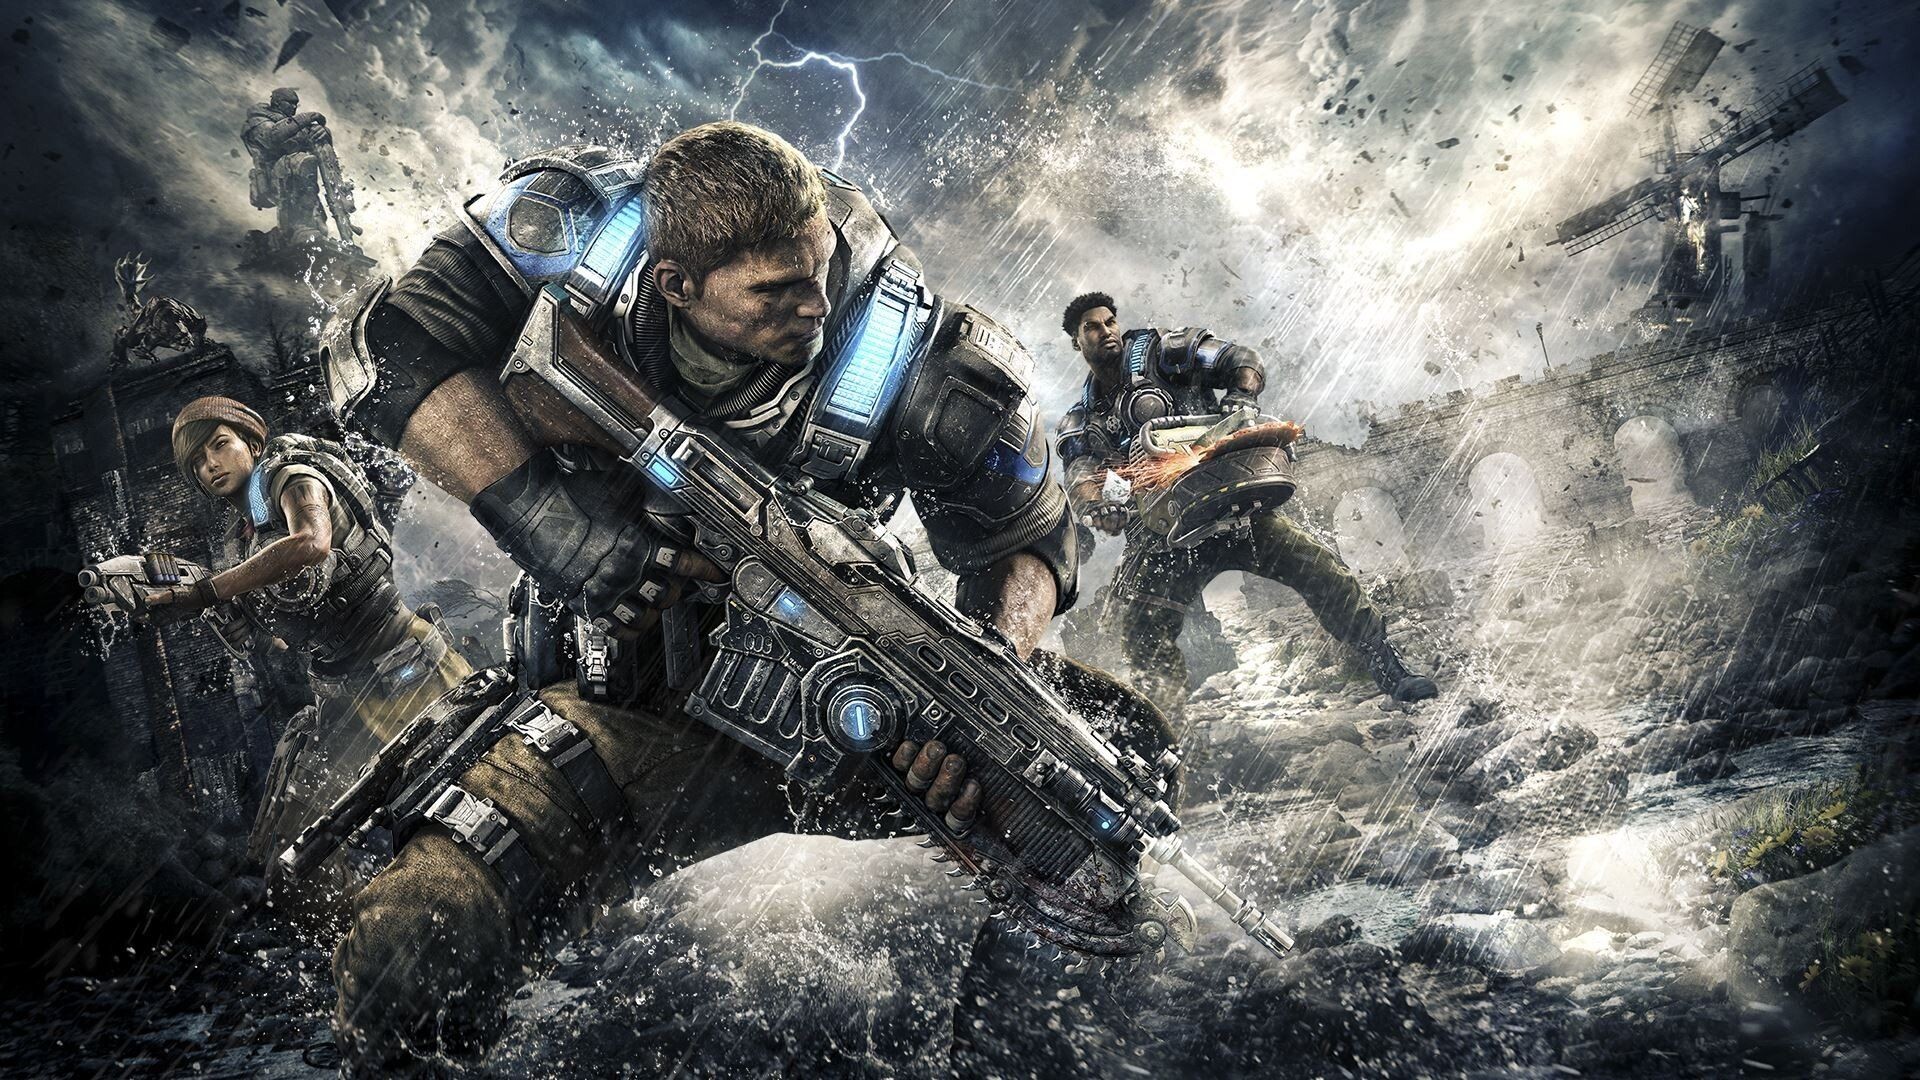 Gears 4 wallpapers, Epic gaming backgrounds, Action-packed battles, Immersive experience, 1920x1080 Full HD Desktop